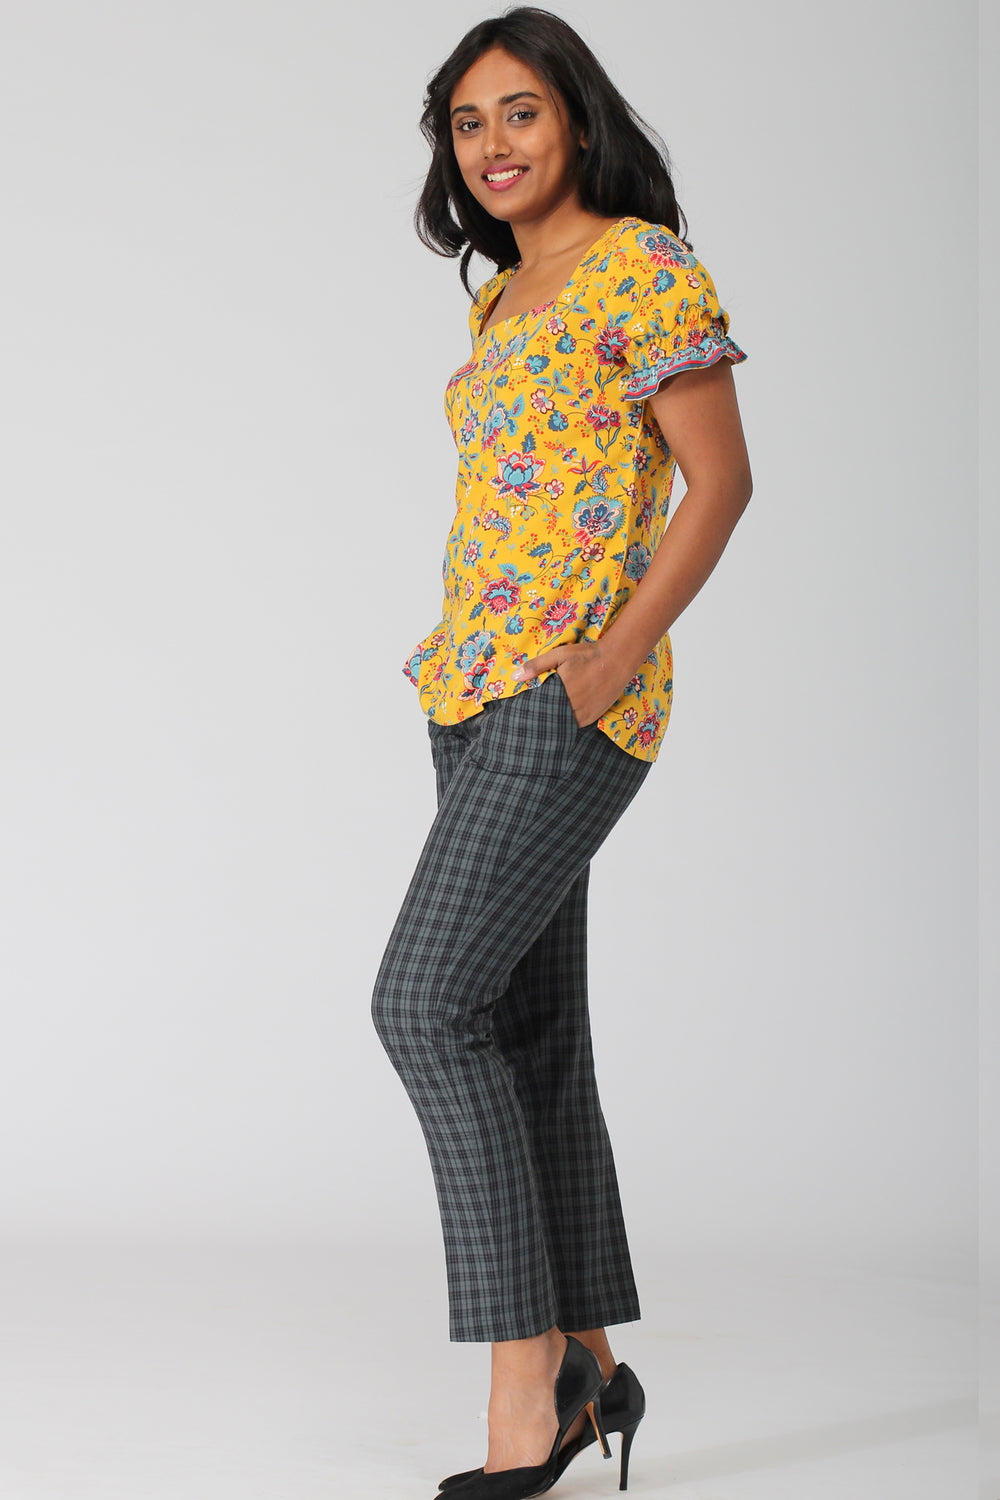 Buy Yellow Cotton Solid Women Regular Wear Check Pant for Best Price,  Reviews, Free Shipping